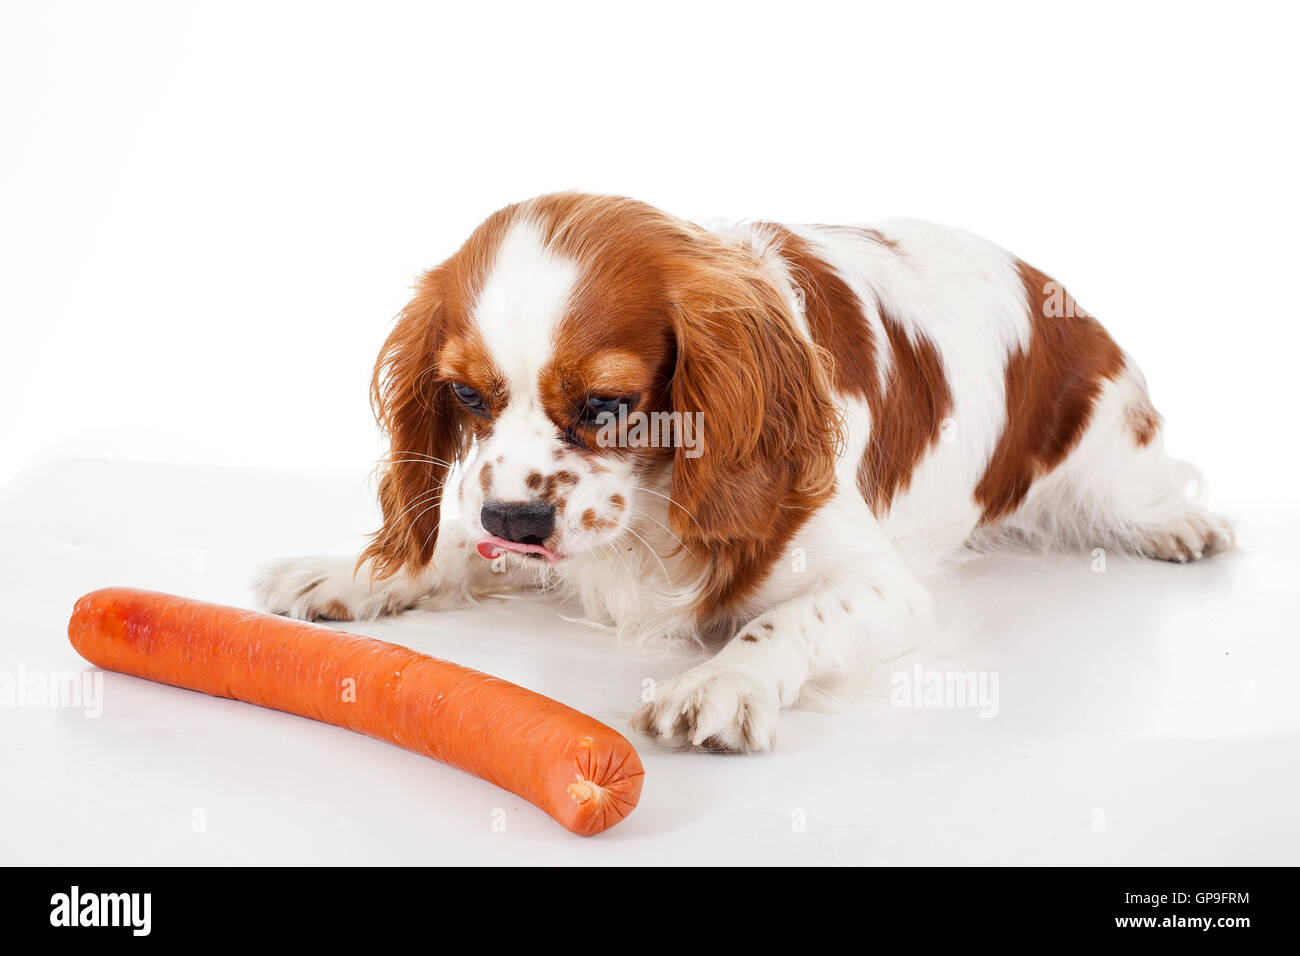 dog,pet,breed,food,snack,healthy,nutriment,meat,feed,chow,ate,sausage,treat,weenie,hot,dog,tongue,snags,snorker,wiener,with,lap, Stock Photo